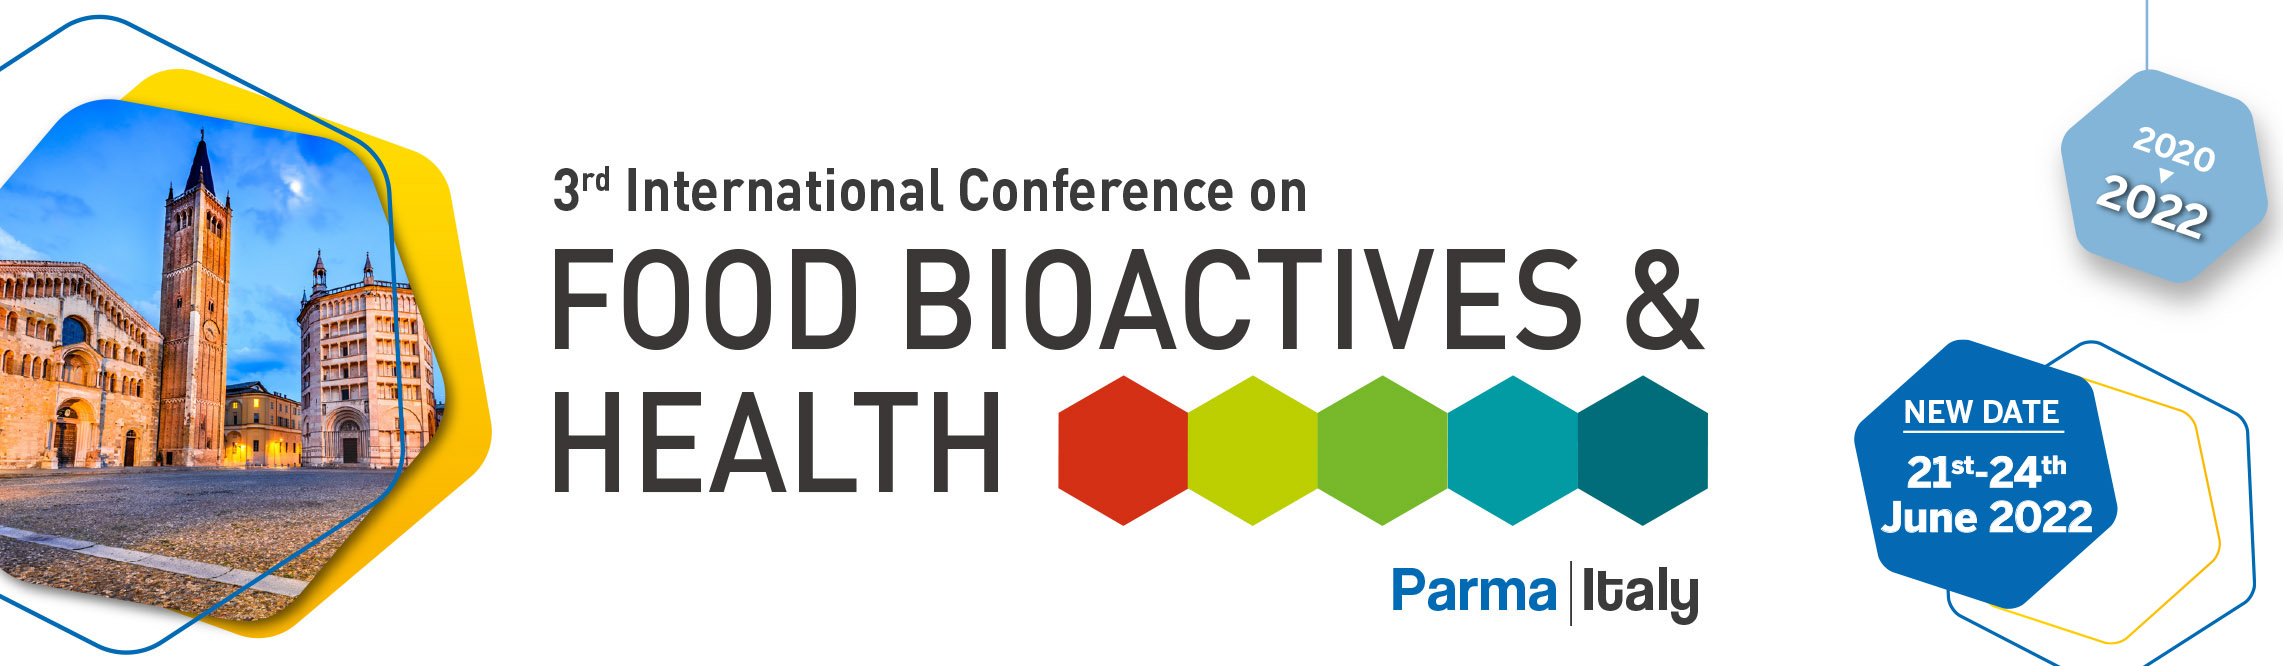 3rd International Conference on Food Bioactives & Health